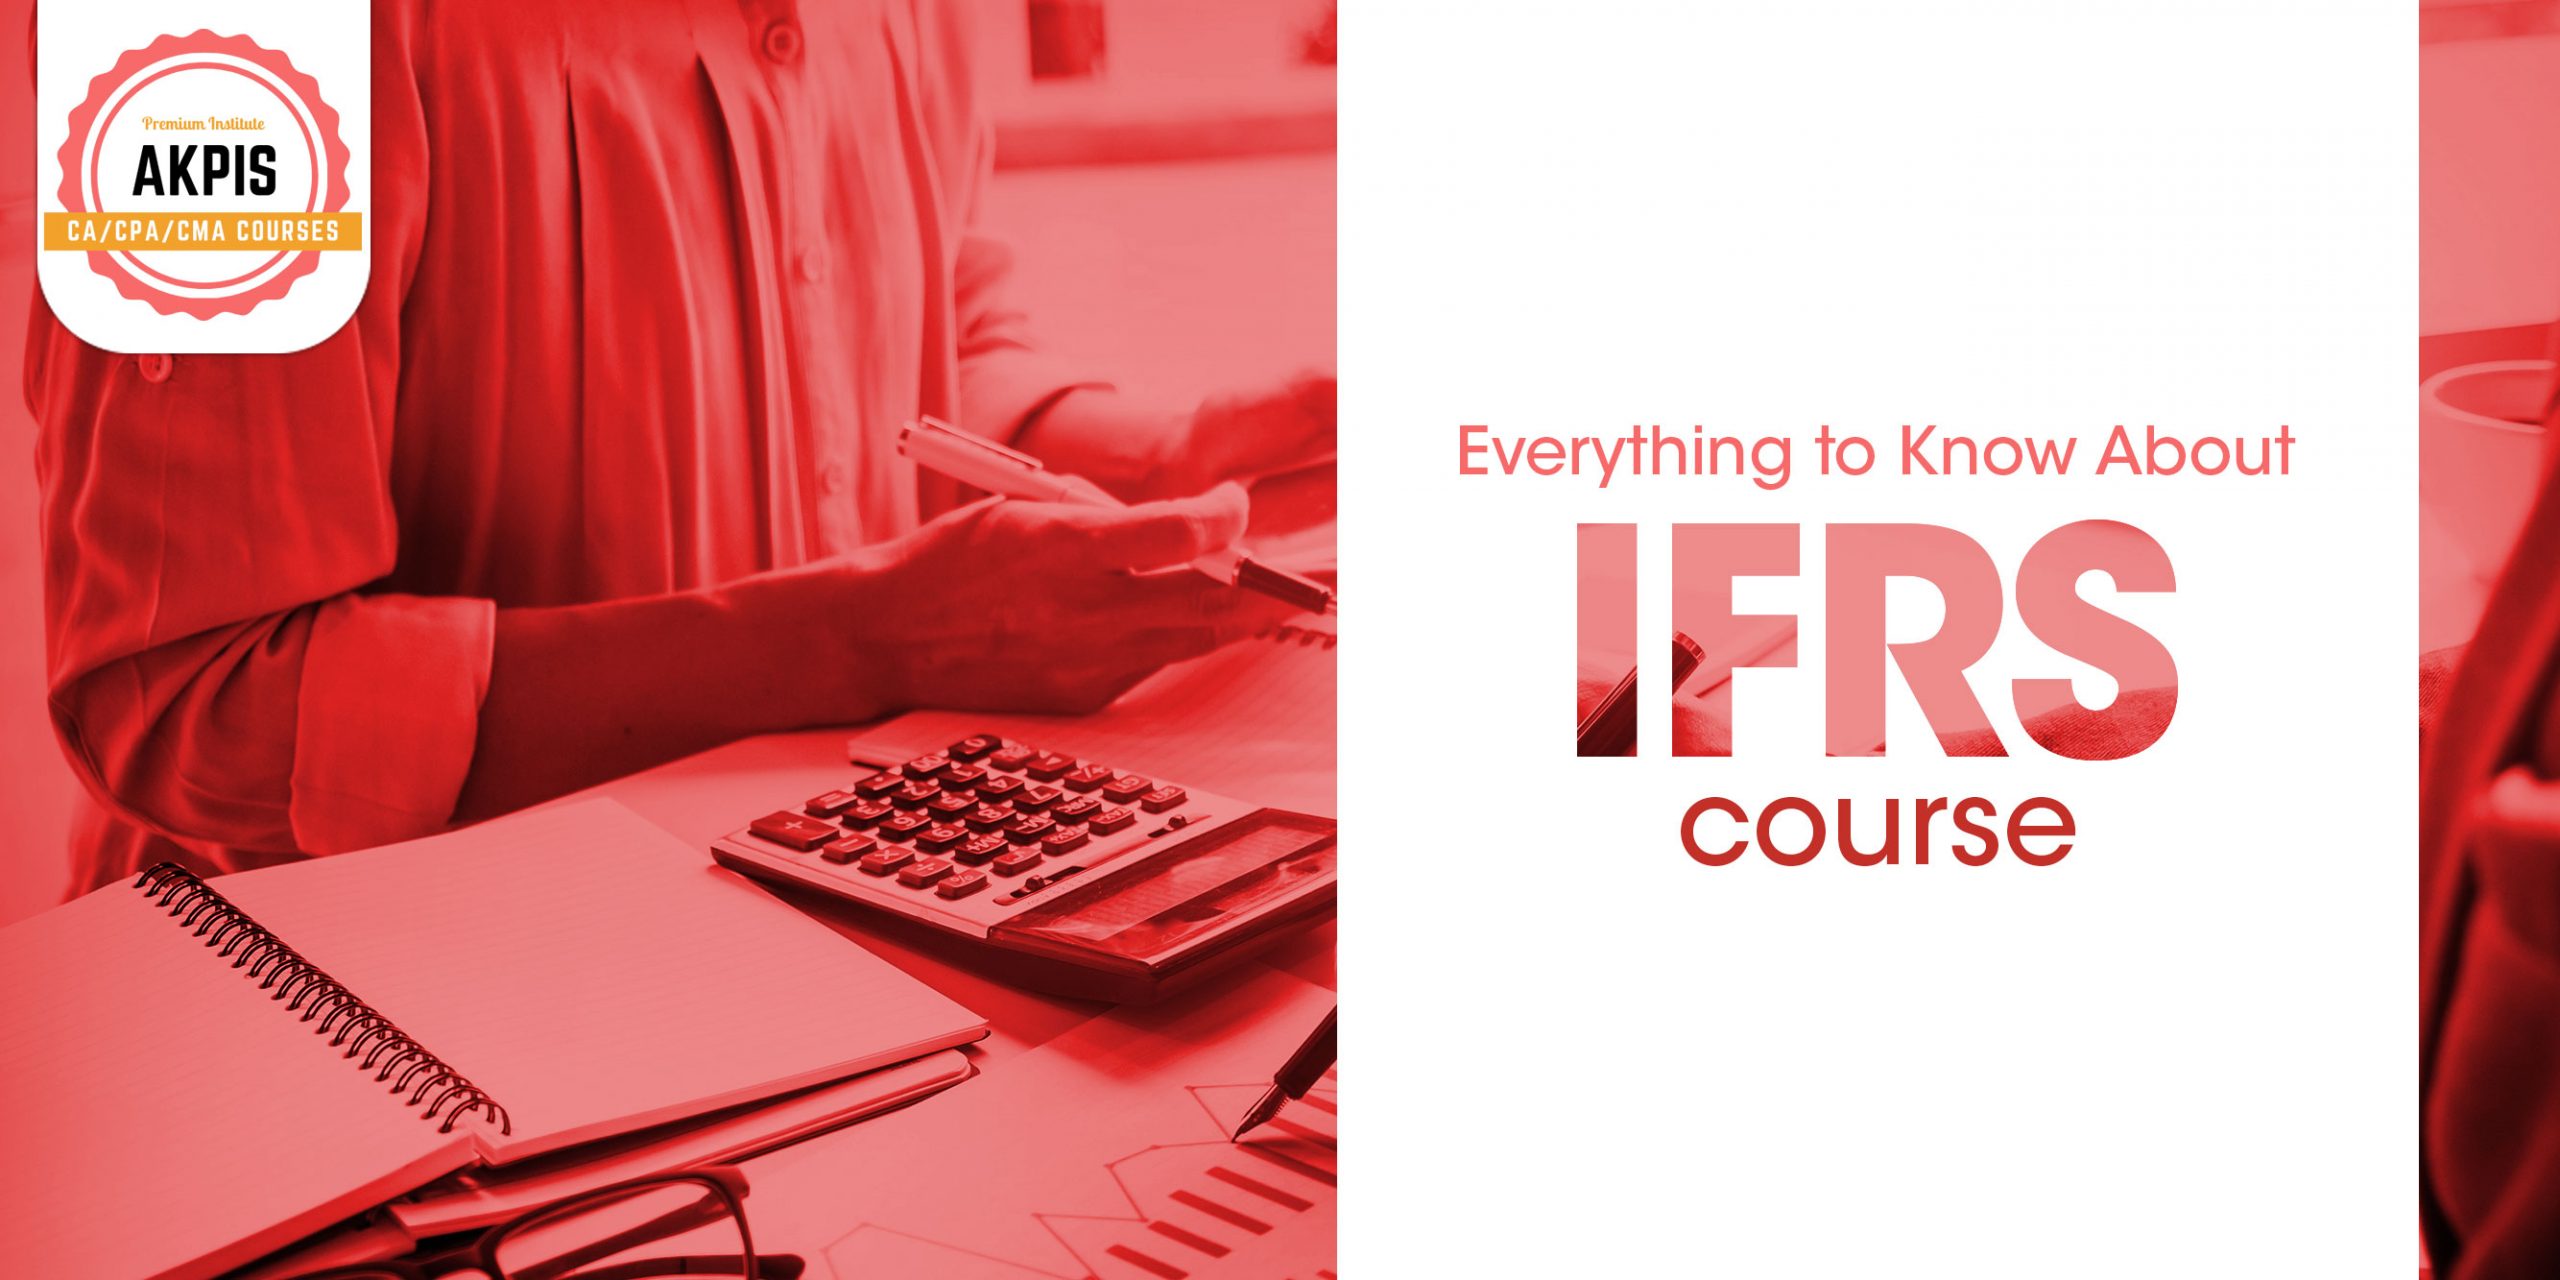 IFRS online course in India